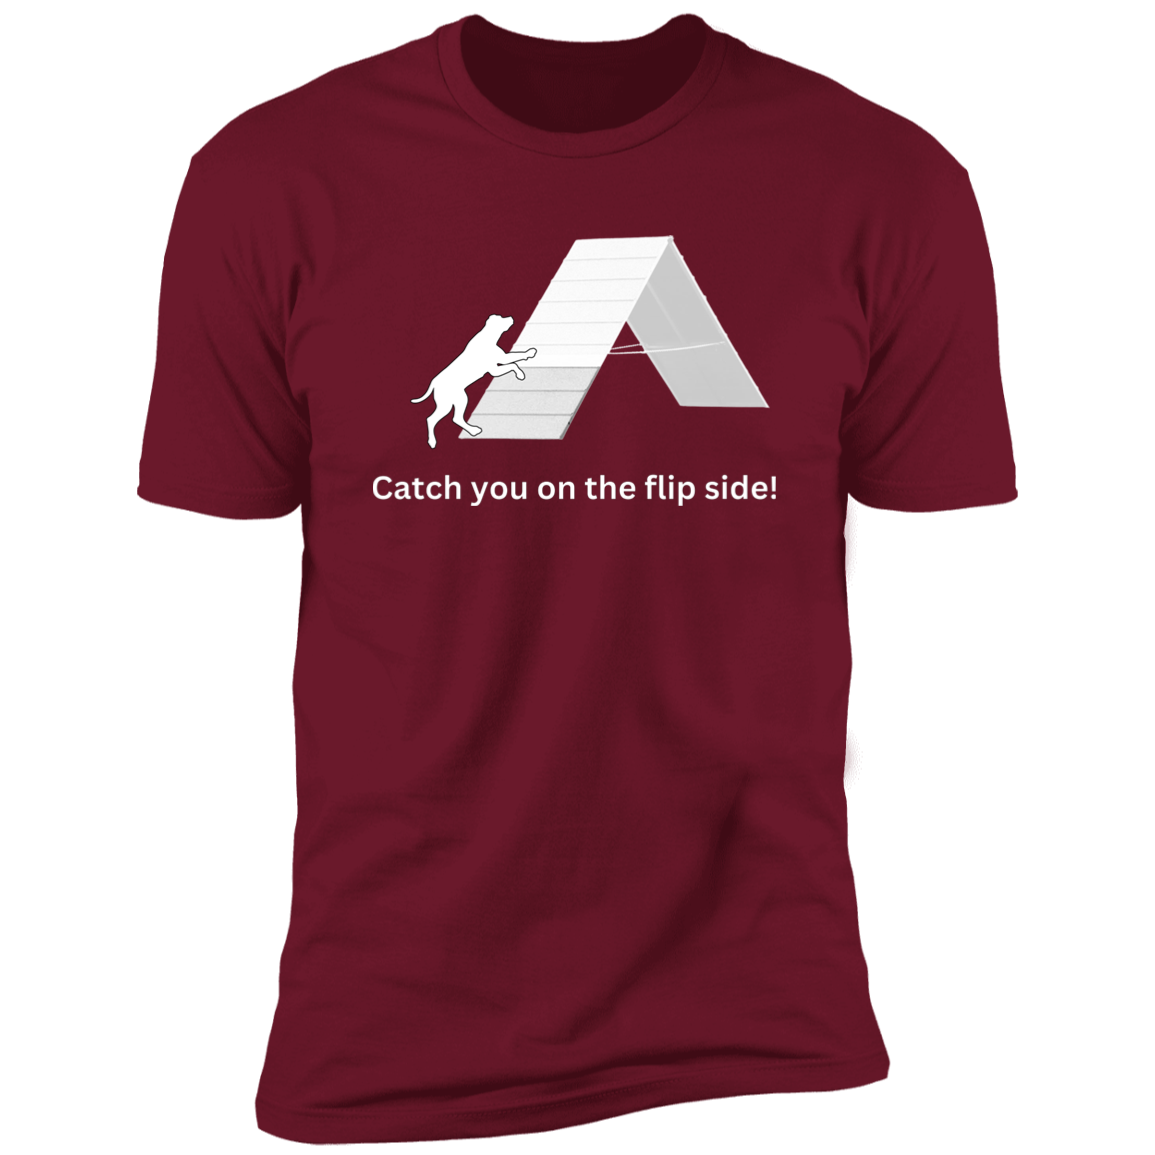 Catch You on the Flip Side T-shirt, Dog Agility Shirt for humans, in cardinal red